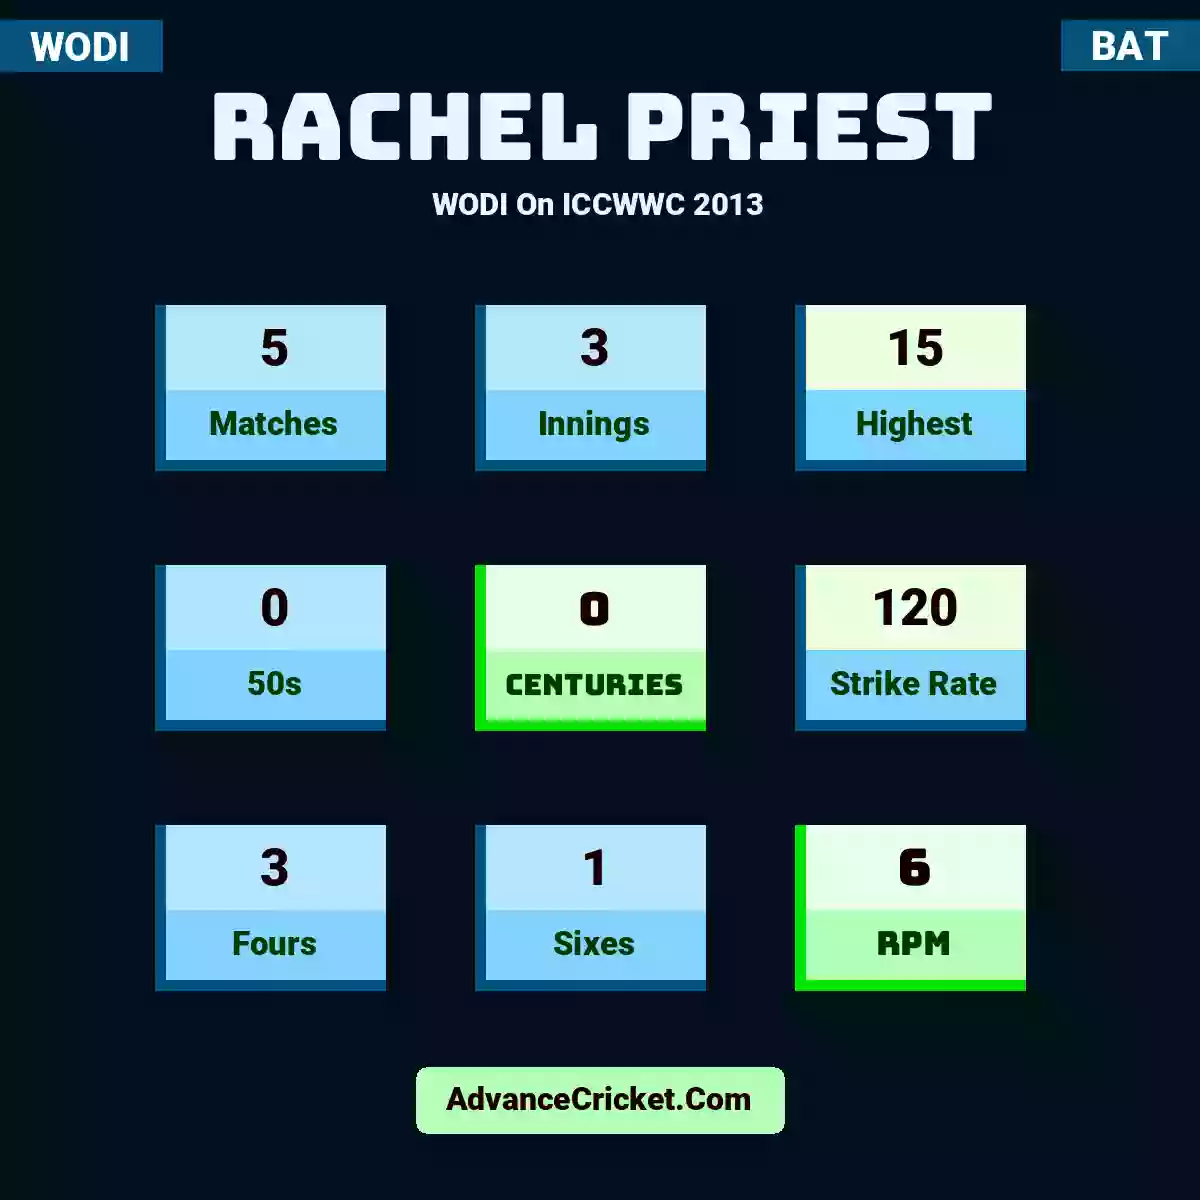 Rachel Priest WODI  On ICCWWC 2013, Rachel Priest played 5 matches, scored 15 runs as highest, 0 half-centuries, and 0 centuries, with a strike rate of 120. R.Priest hit 3 fours and 1 sixes, with an RPM of 6.